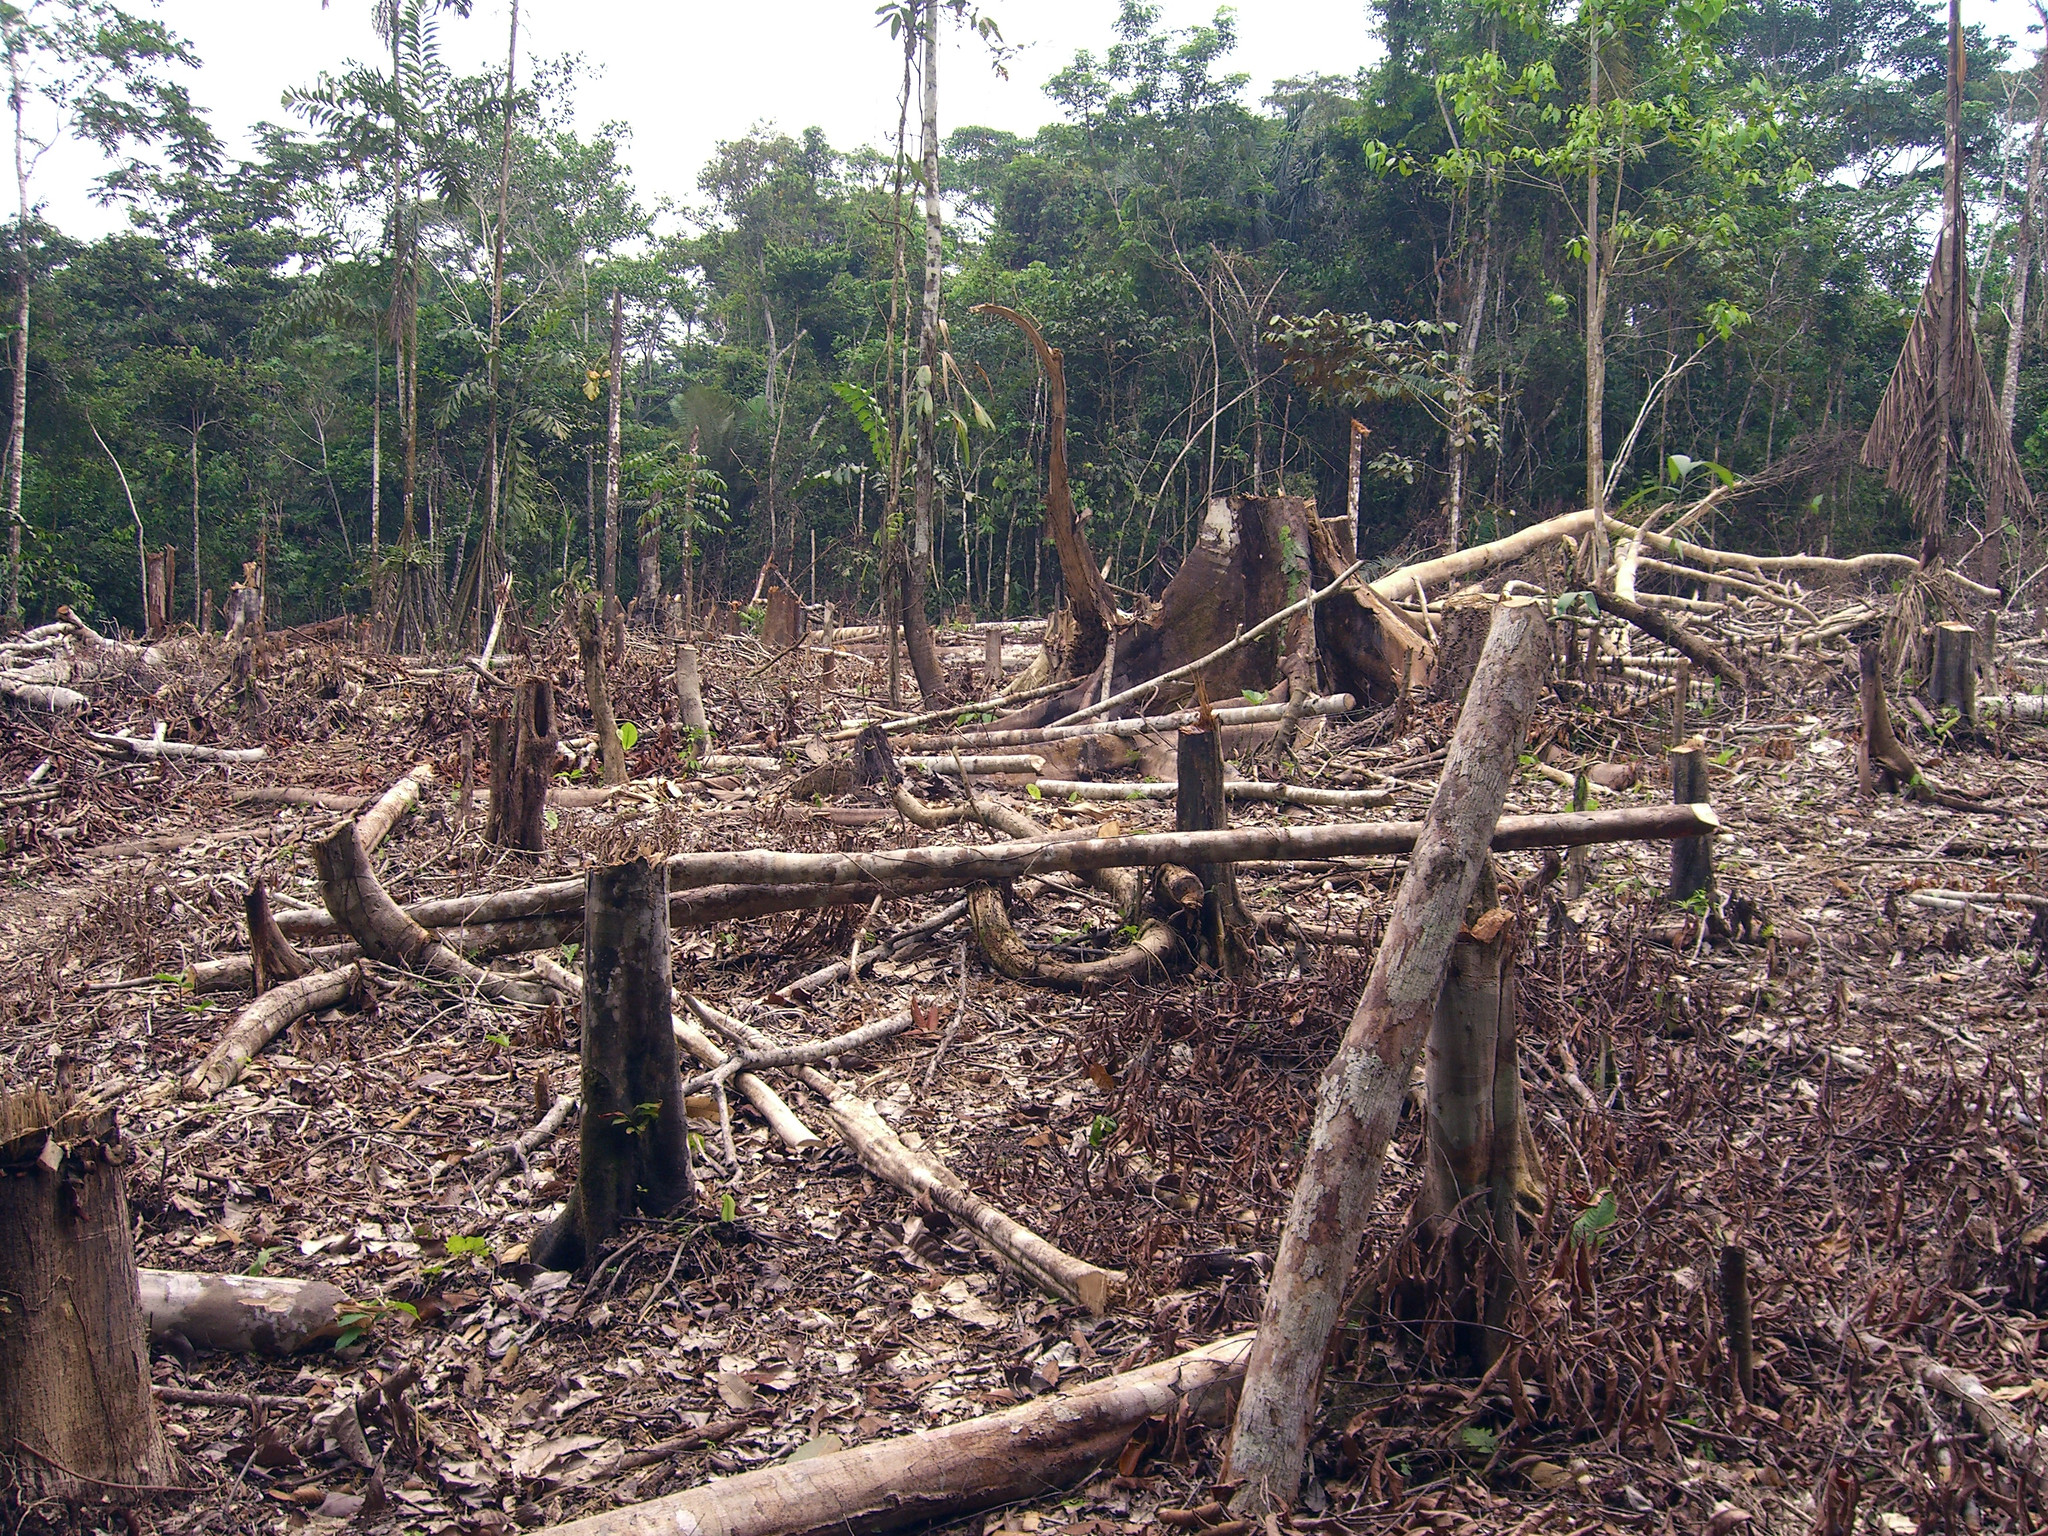 Tropical deforestation - many burned tree stumps in the foreground, a rainforest in the background